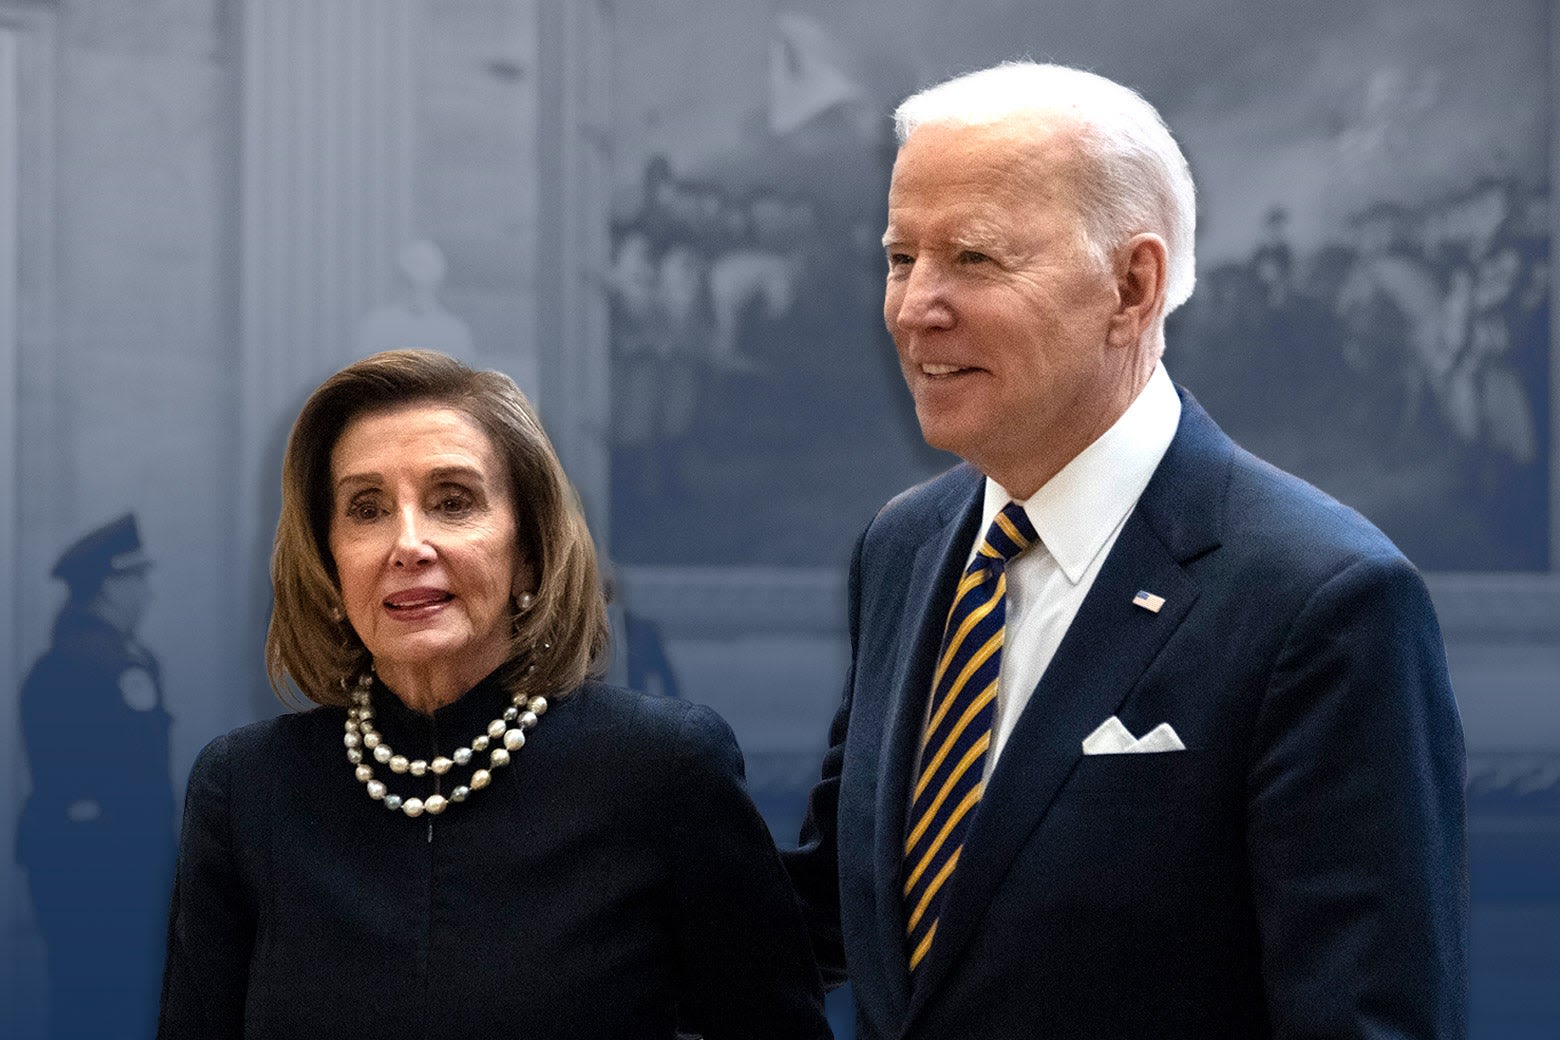 How Nancy Pelosi Persuaded Biden to Leave the Race